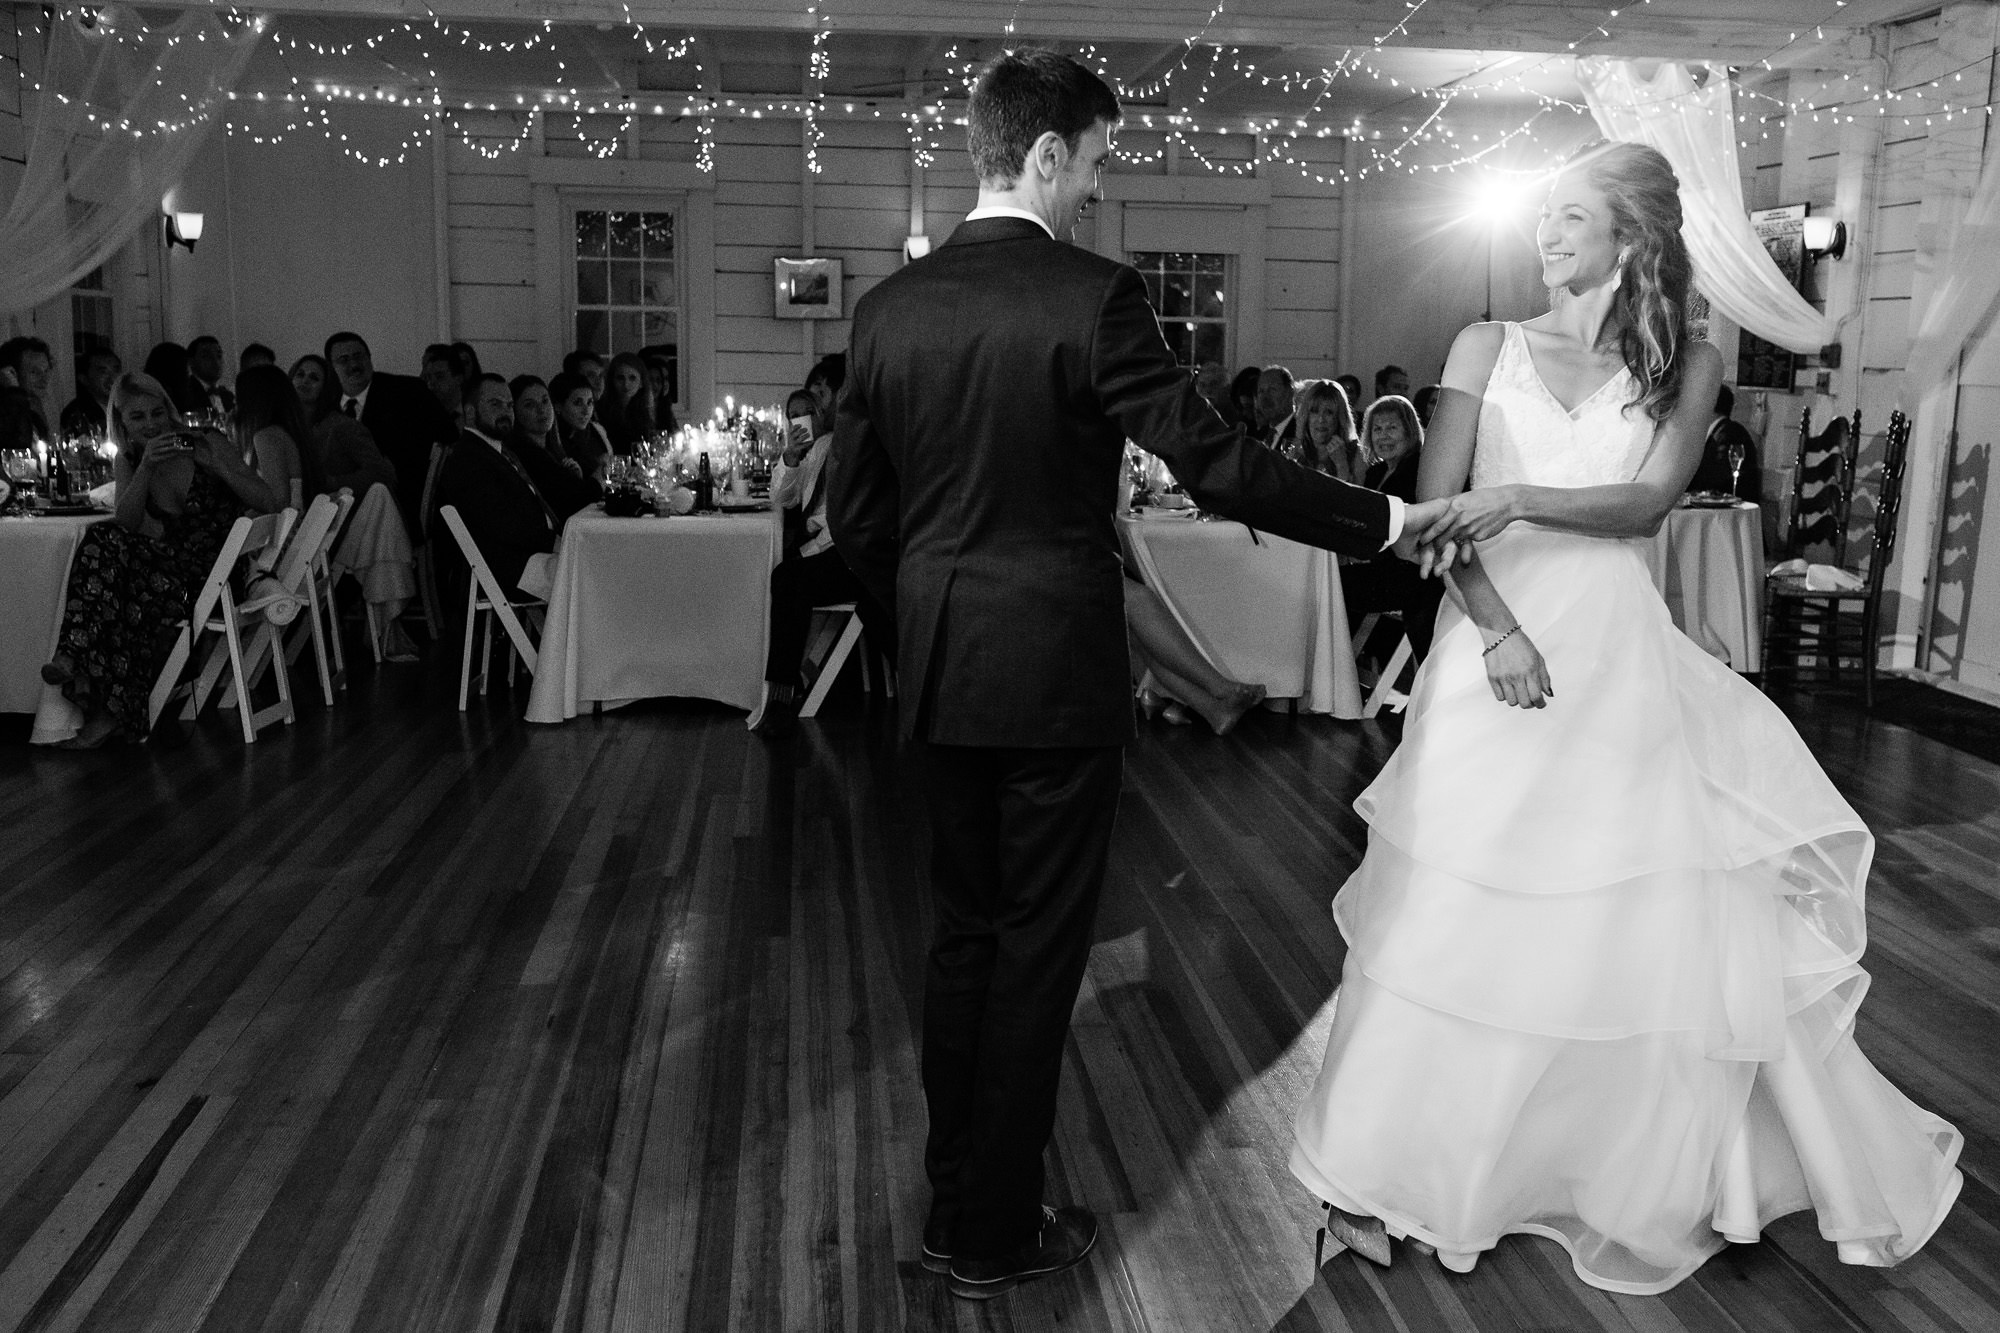 The happy couple shares their first dance at their Mount Desert Island wedding